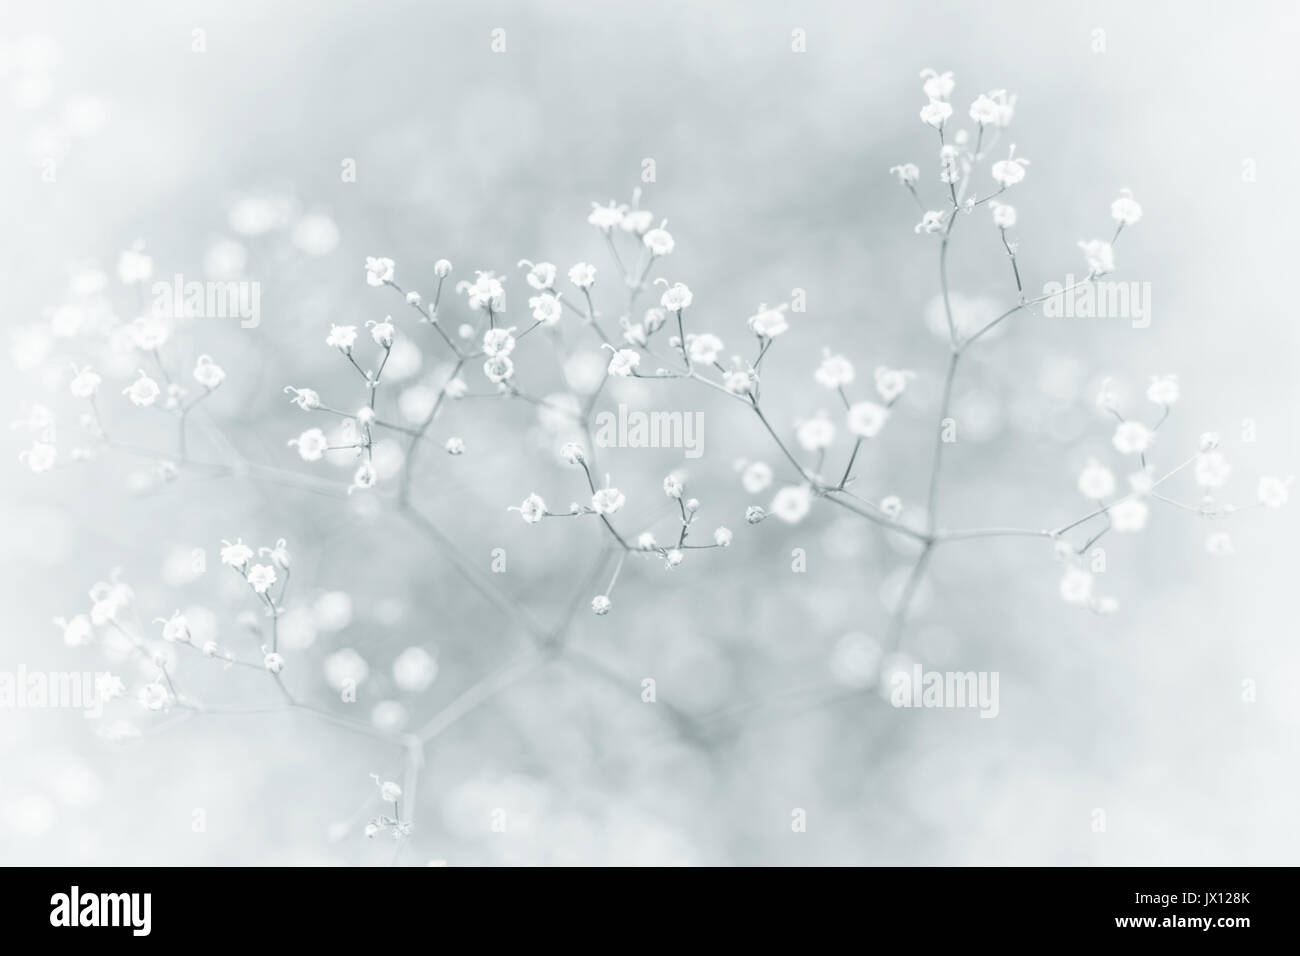 Small Defocused White Flowers (Gypsophila) with Vintage Effect as Natural Background Stock Photo